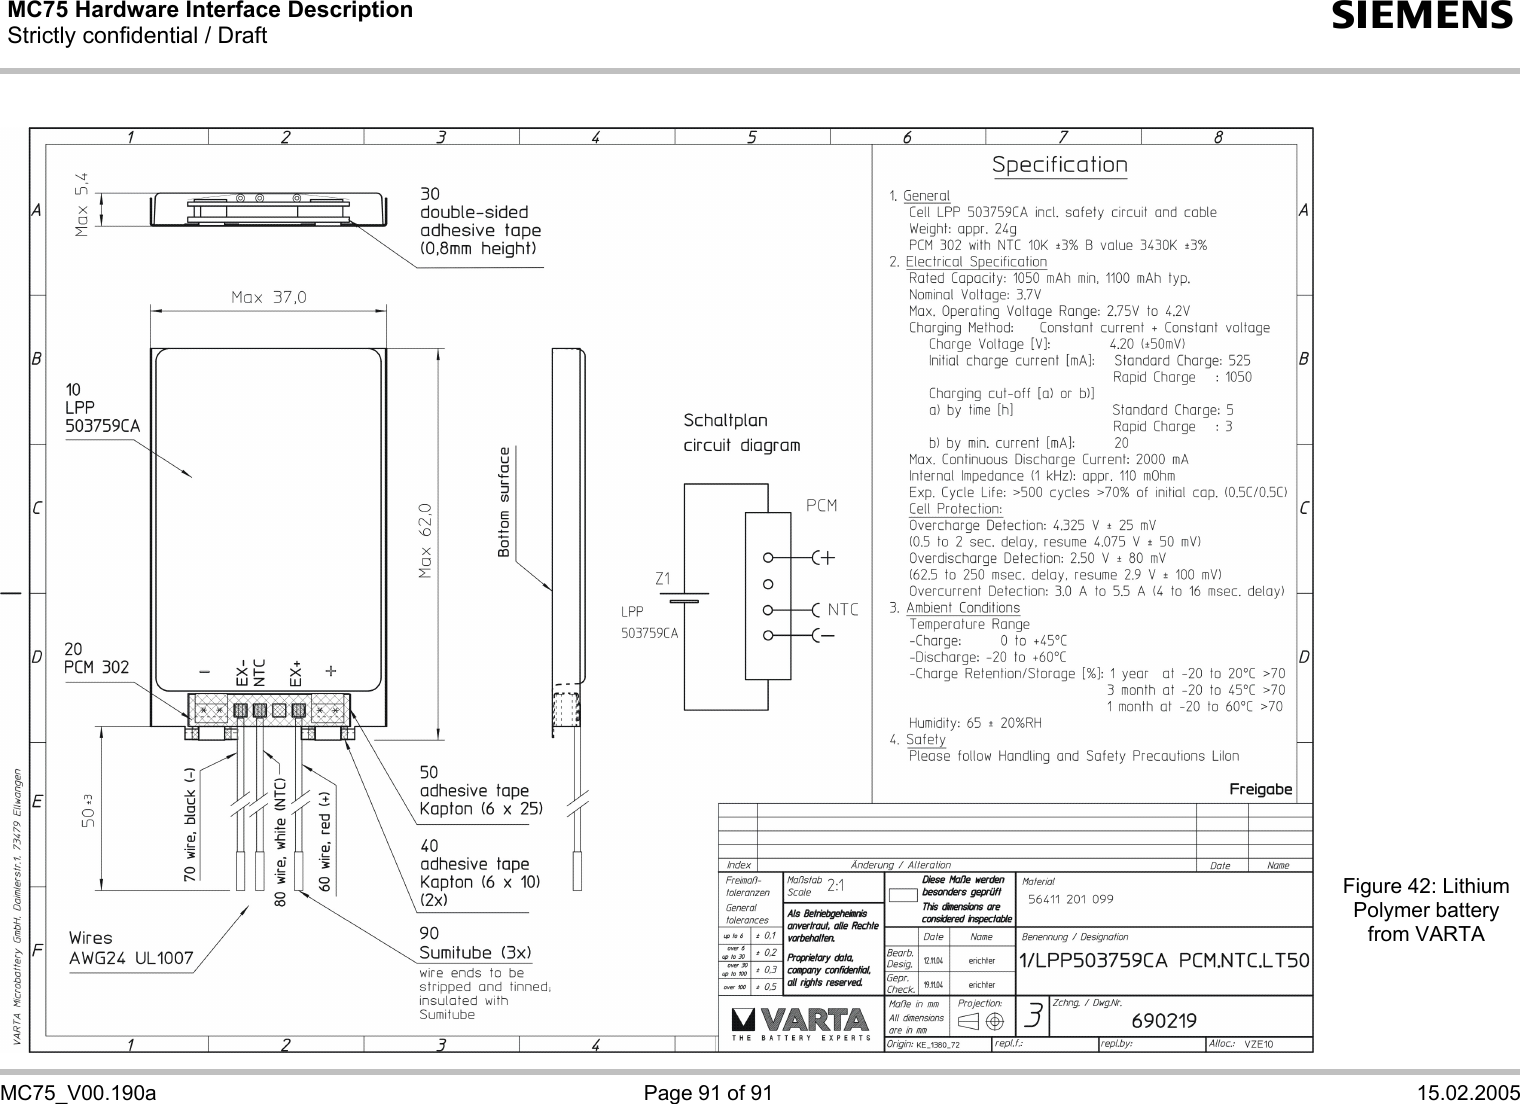 MC75 Hardware Interface Description Strictly confidential / Draft  s   MC75_V00.190a  Page 91 of 91  15.02.2005                              Figure 42: Lithium Polymer battery from VARTA  